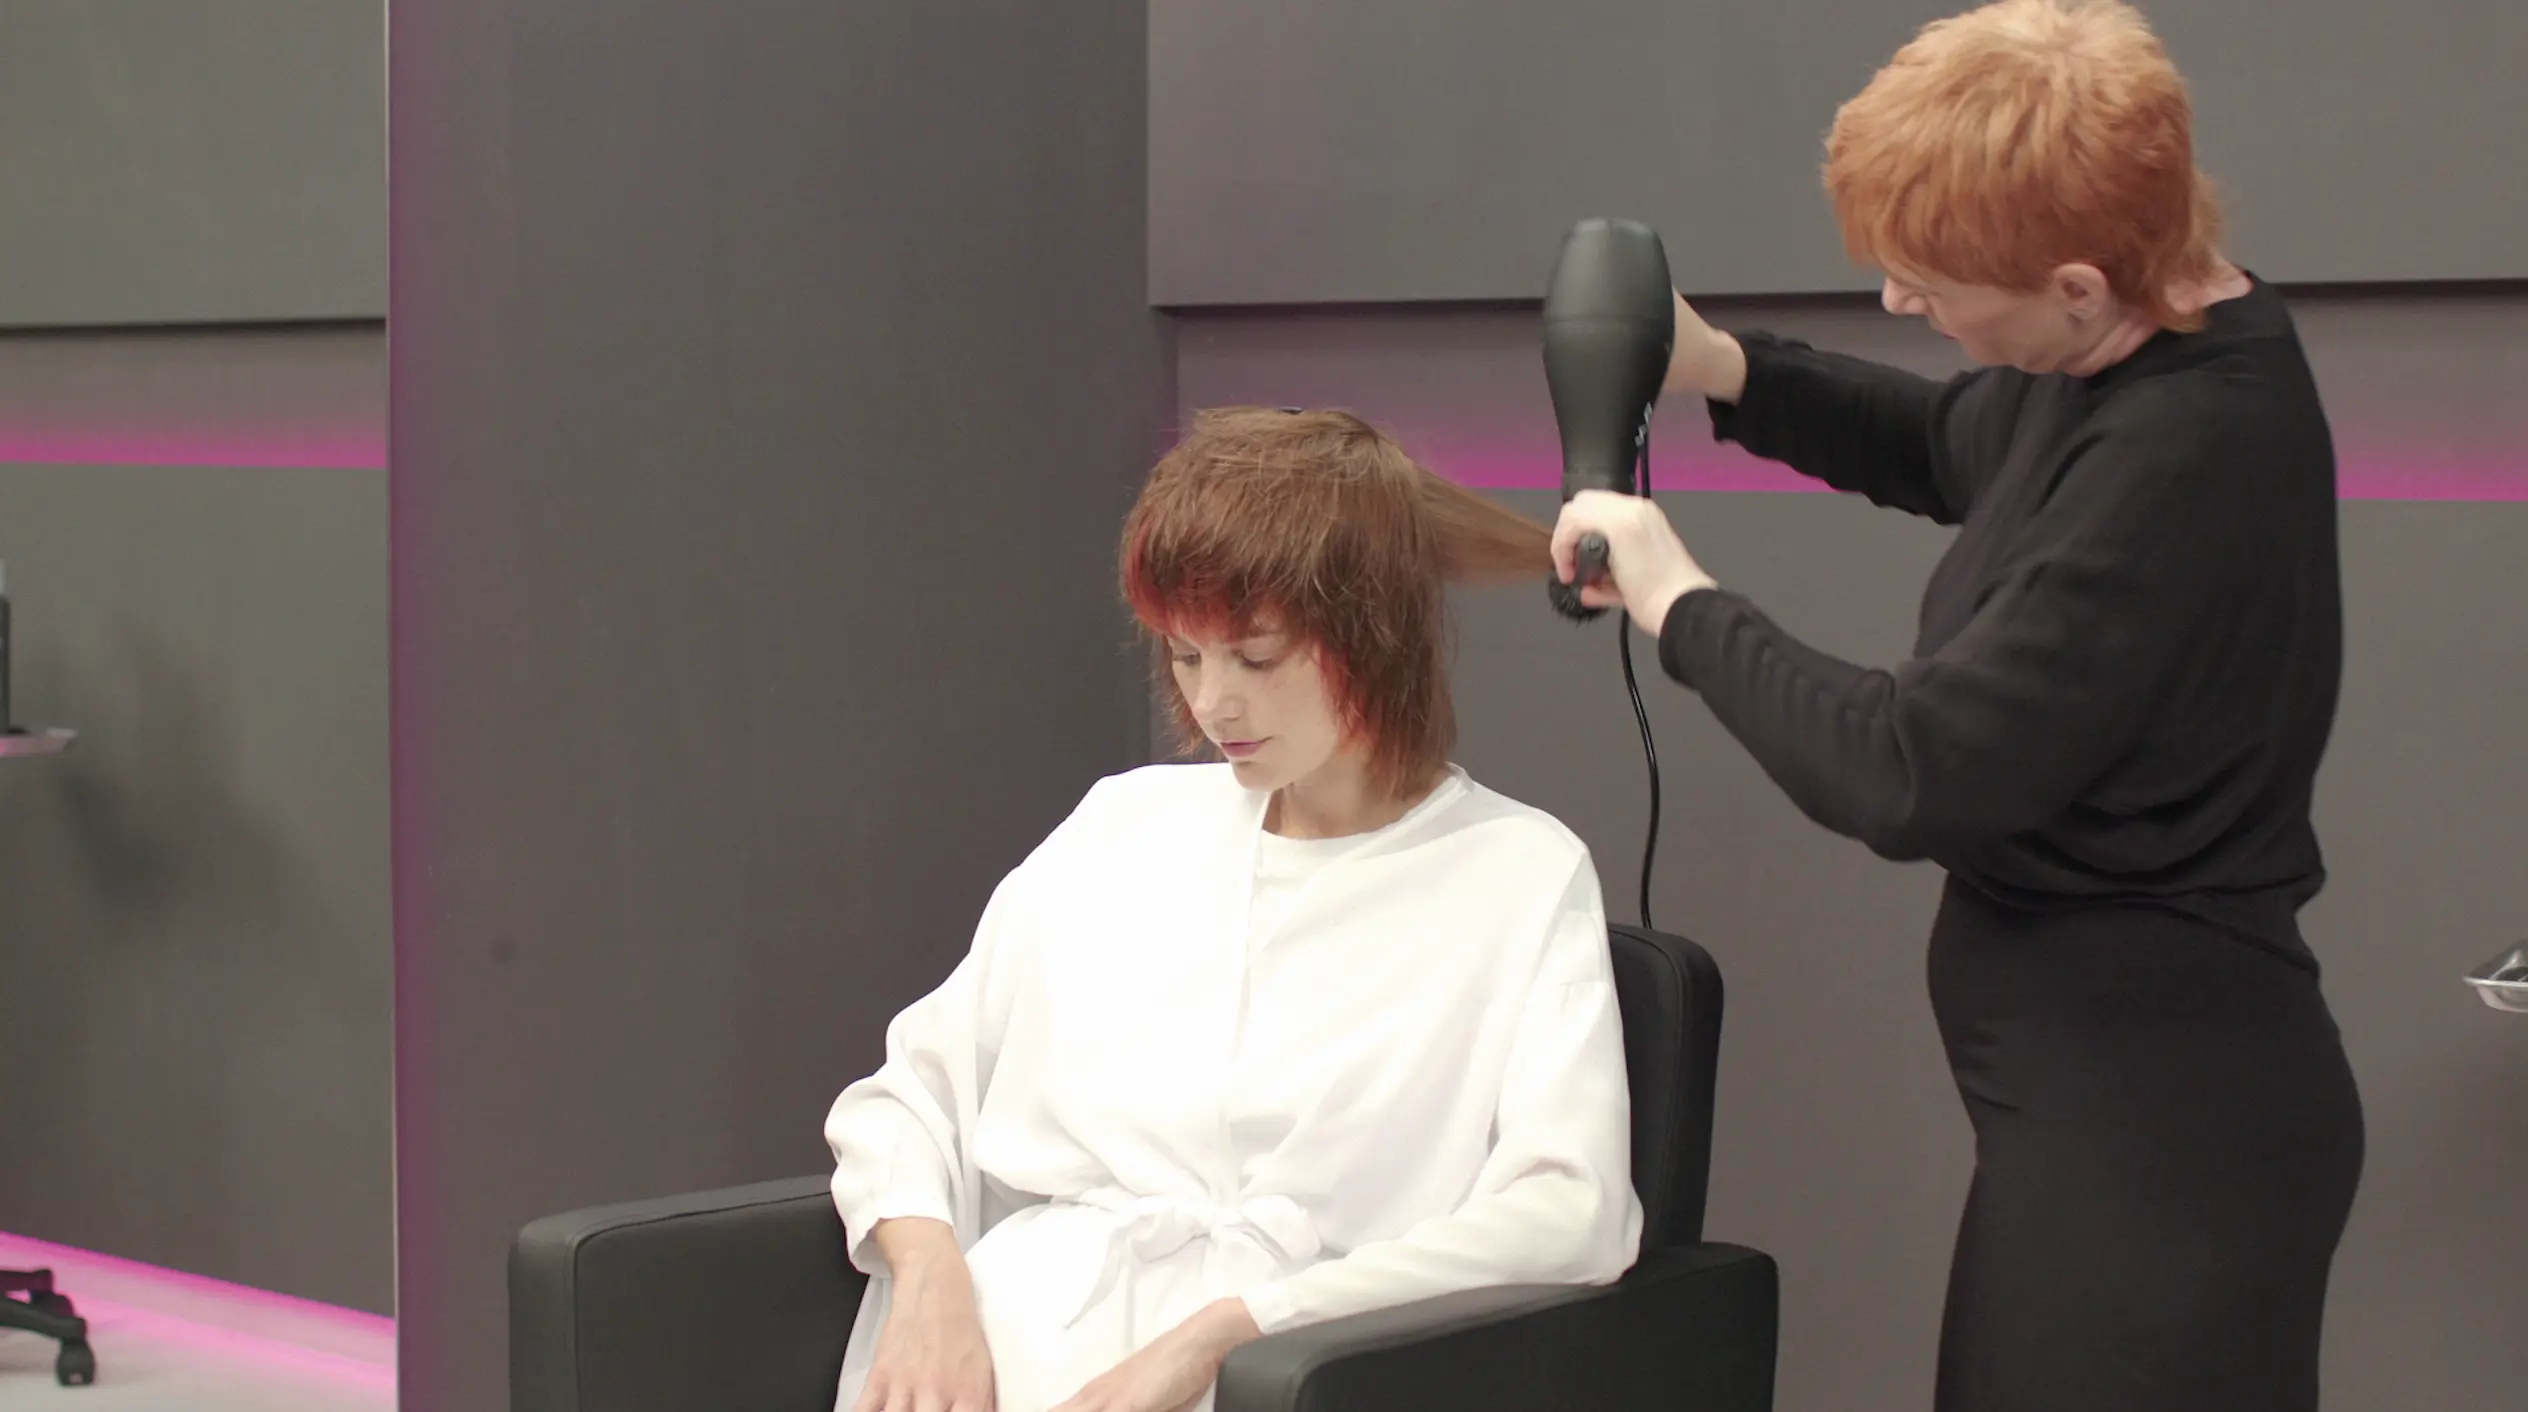 Hairdresser shaping a mullet haircut